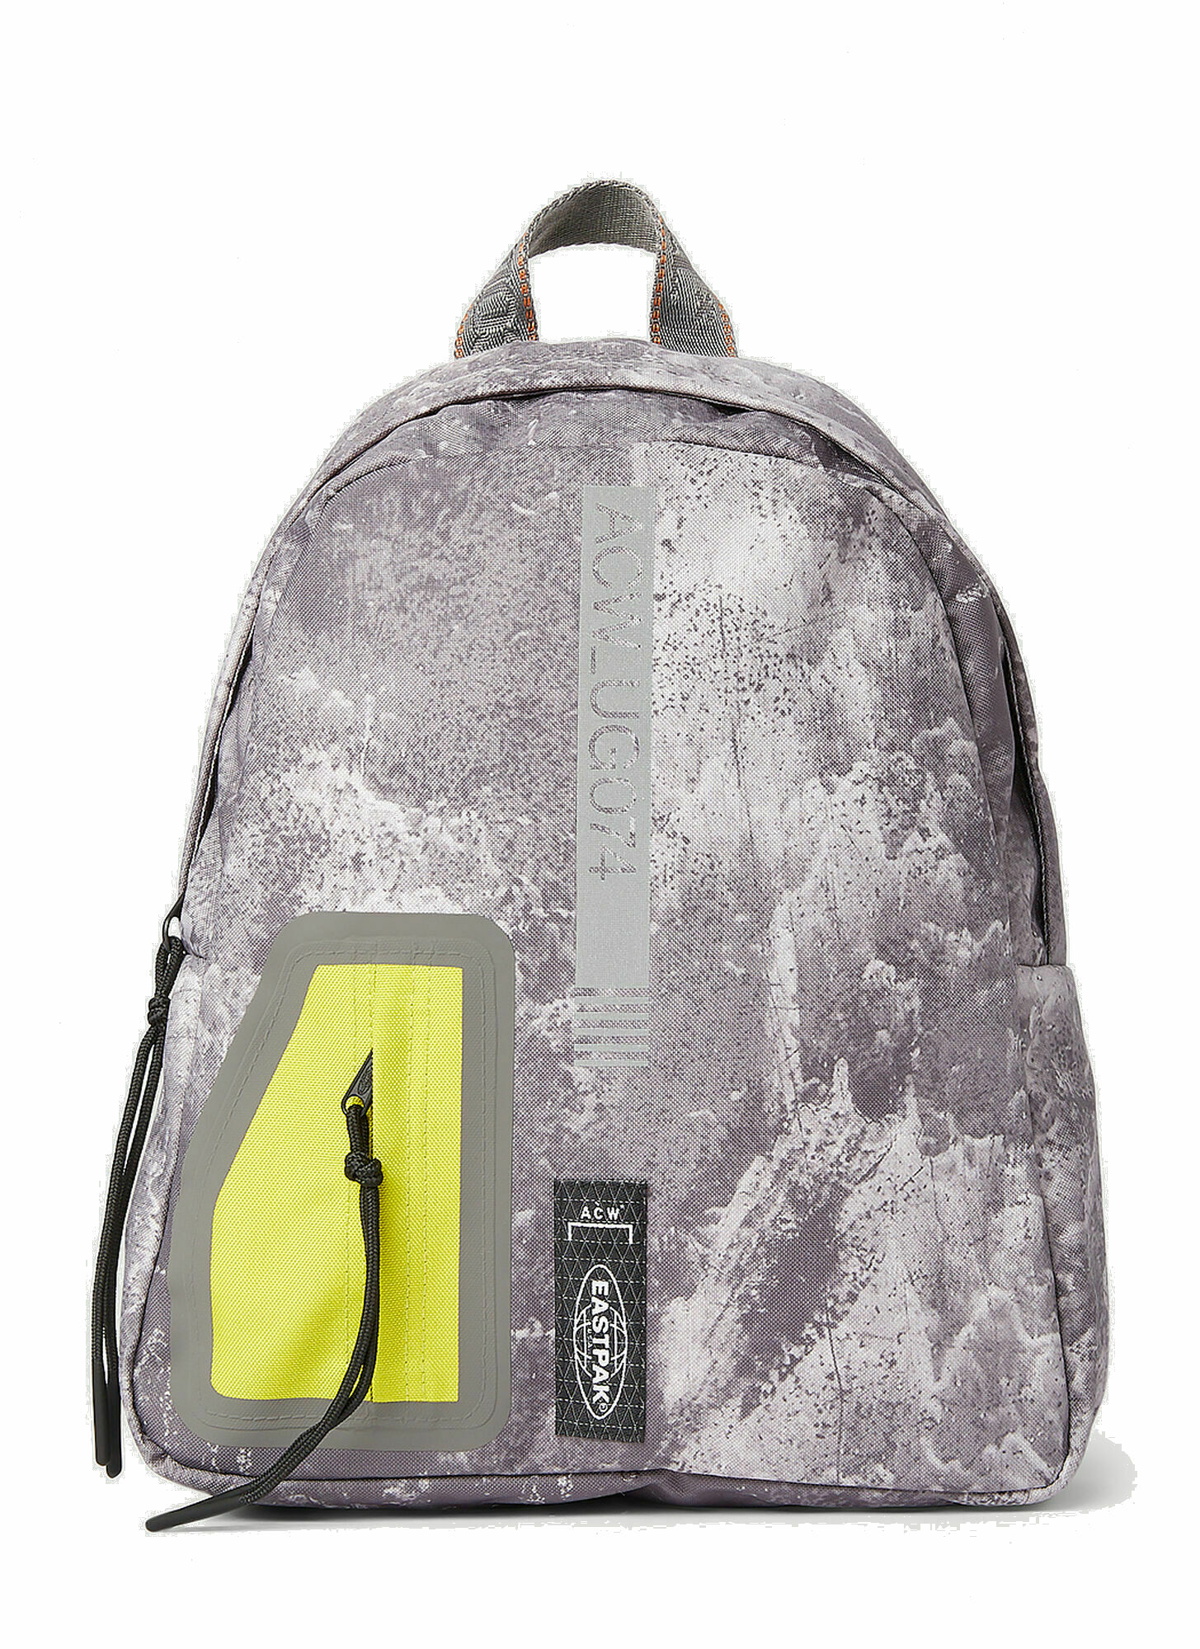 Photo: A-COLD-WALL* x Eastpak - Greyscale Small Backpack in Light Grey